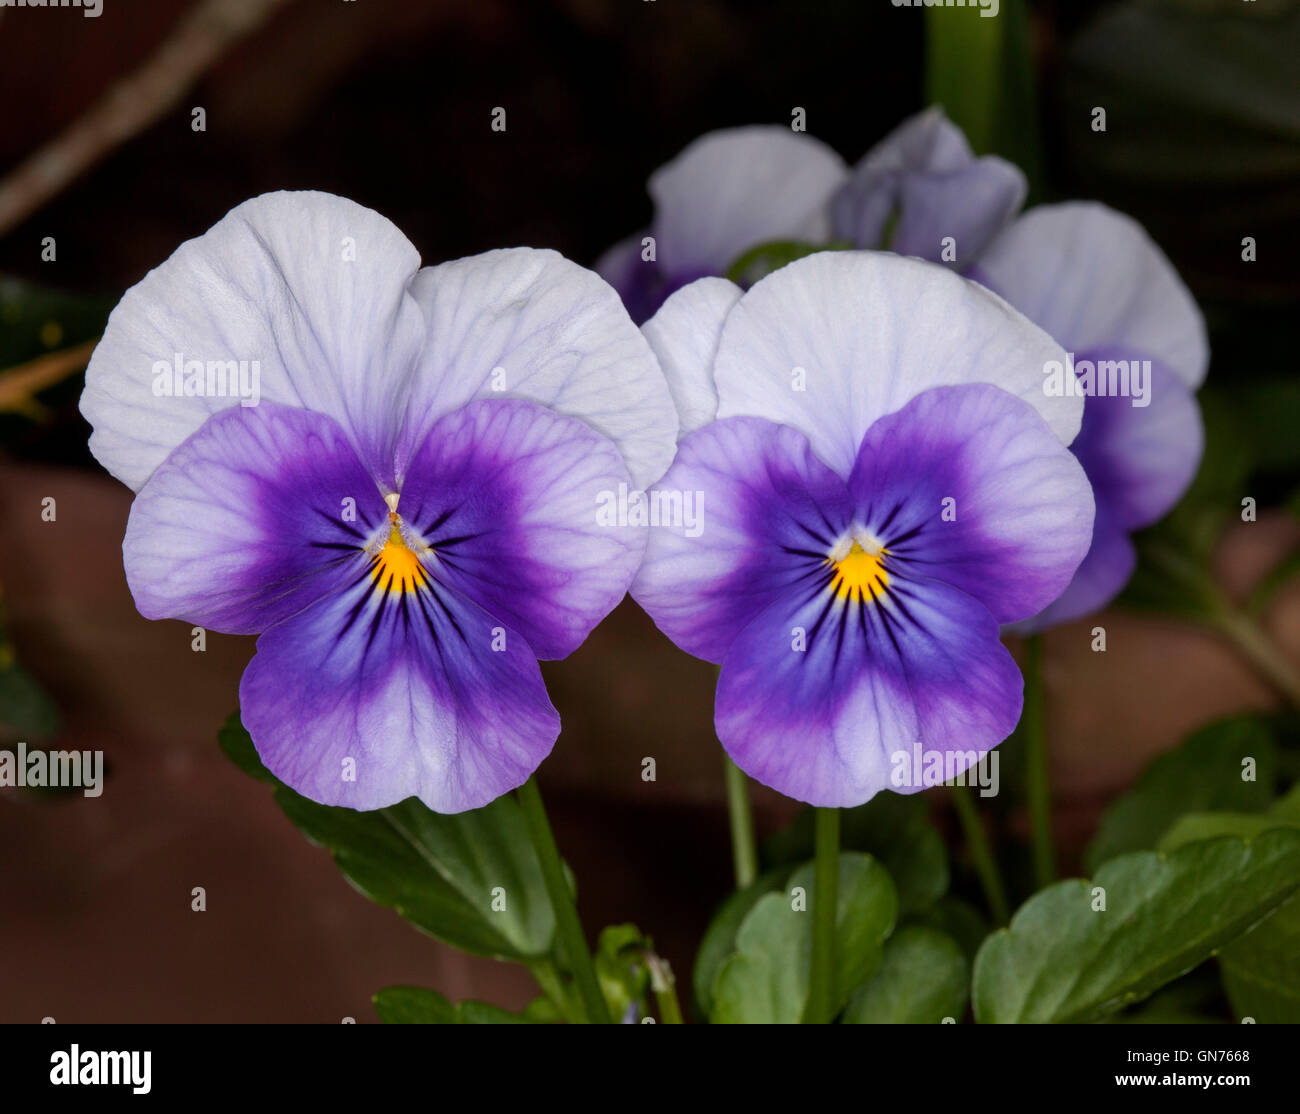 Two stunning and unusual vivid purple and white flowers of annual violas / pansies with yellow centres on dark background Stock Photo